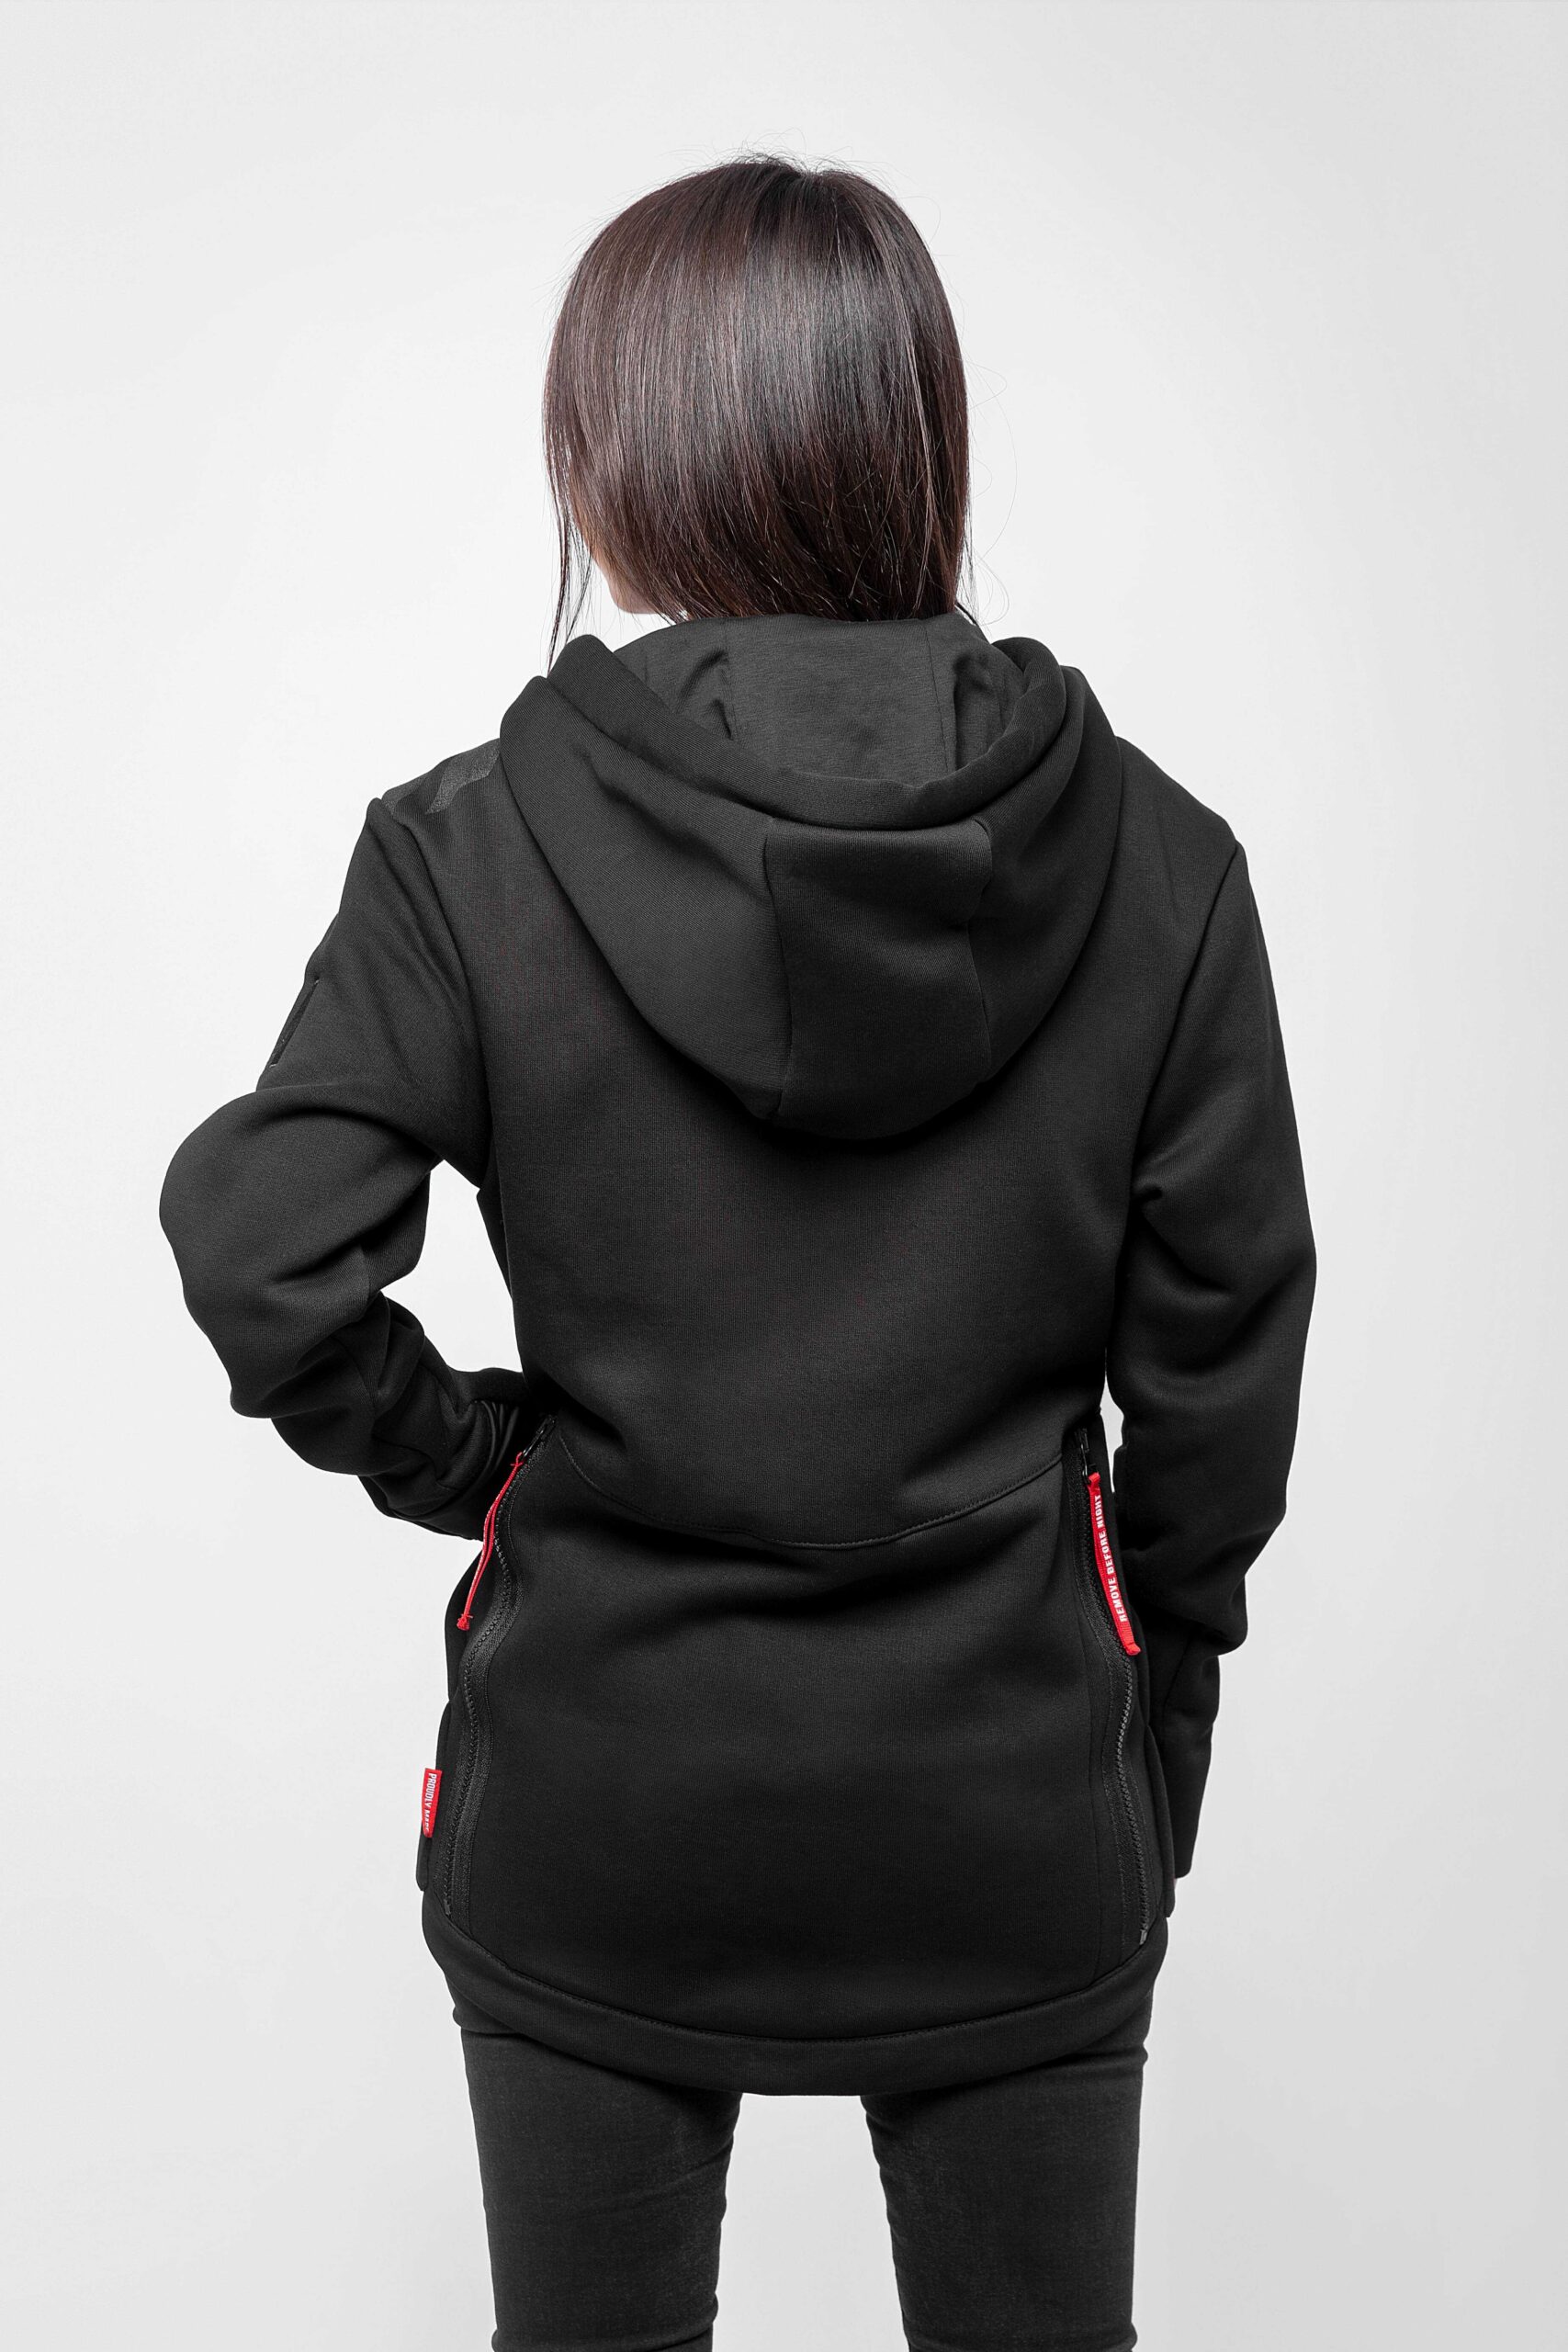 Women's Hoodie Runway. Color black.  Don’t worry about the universal size.